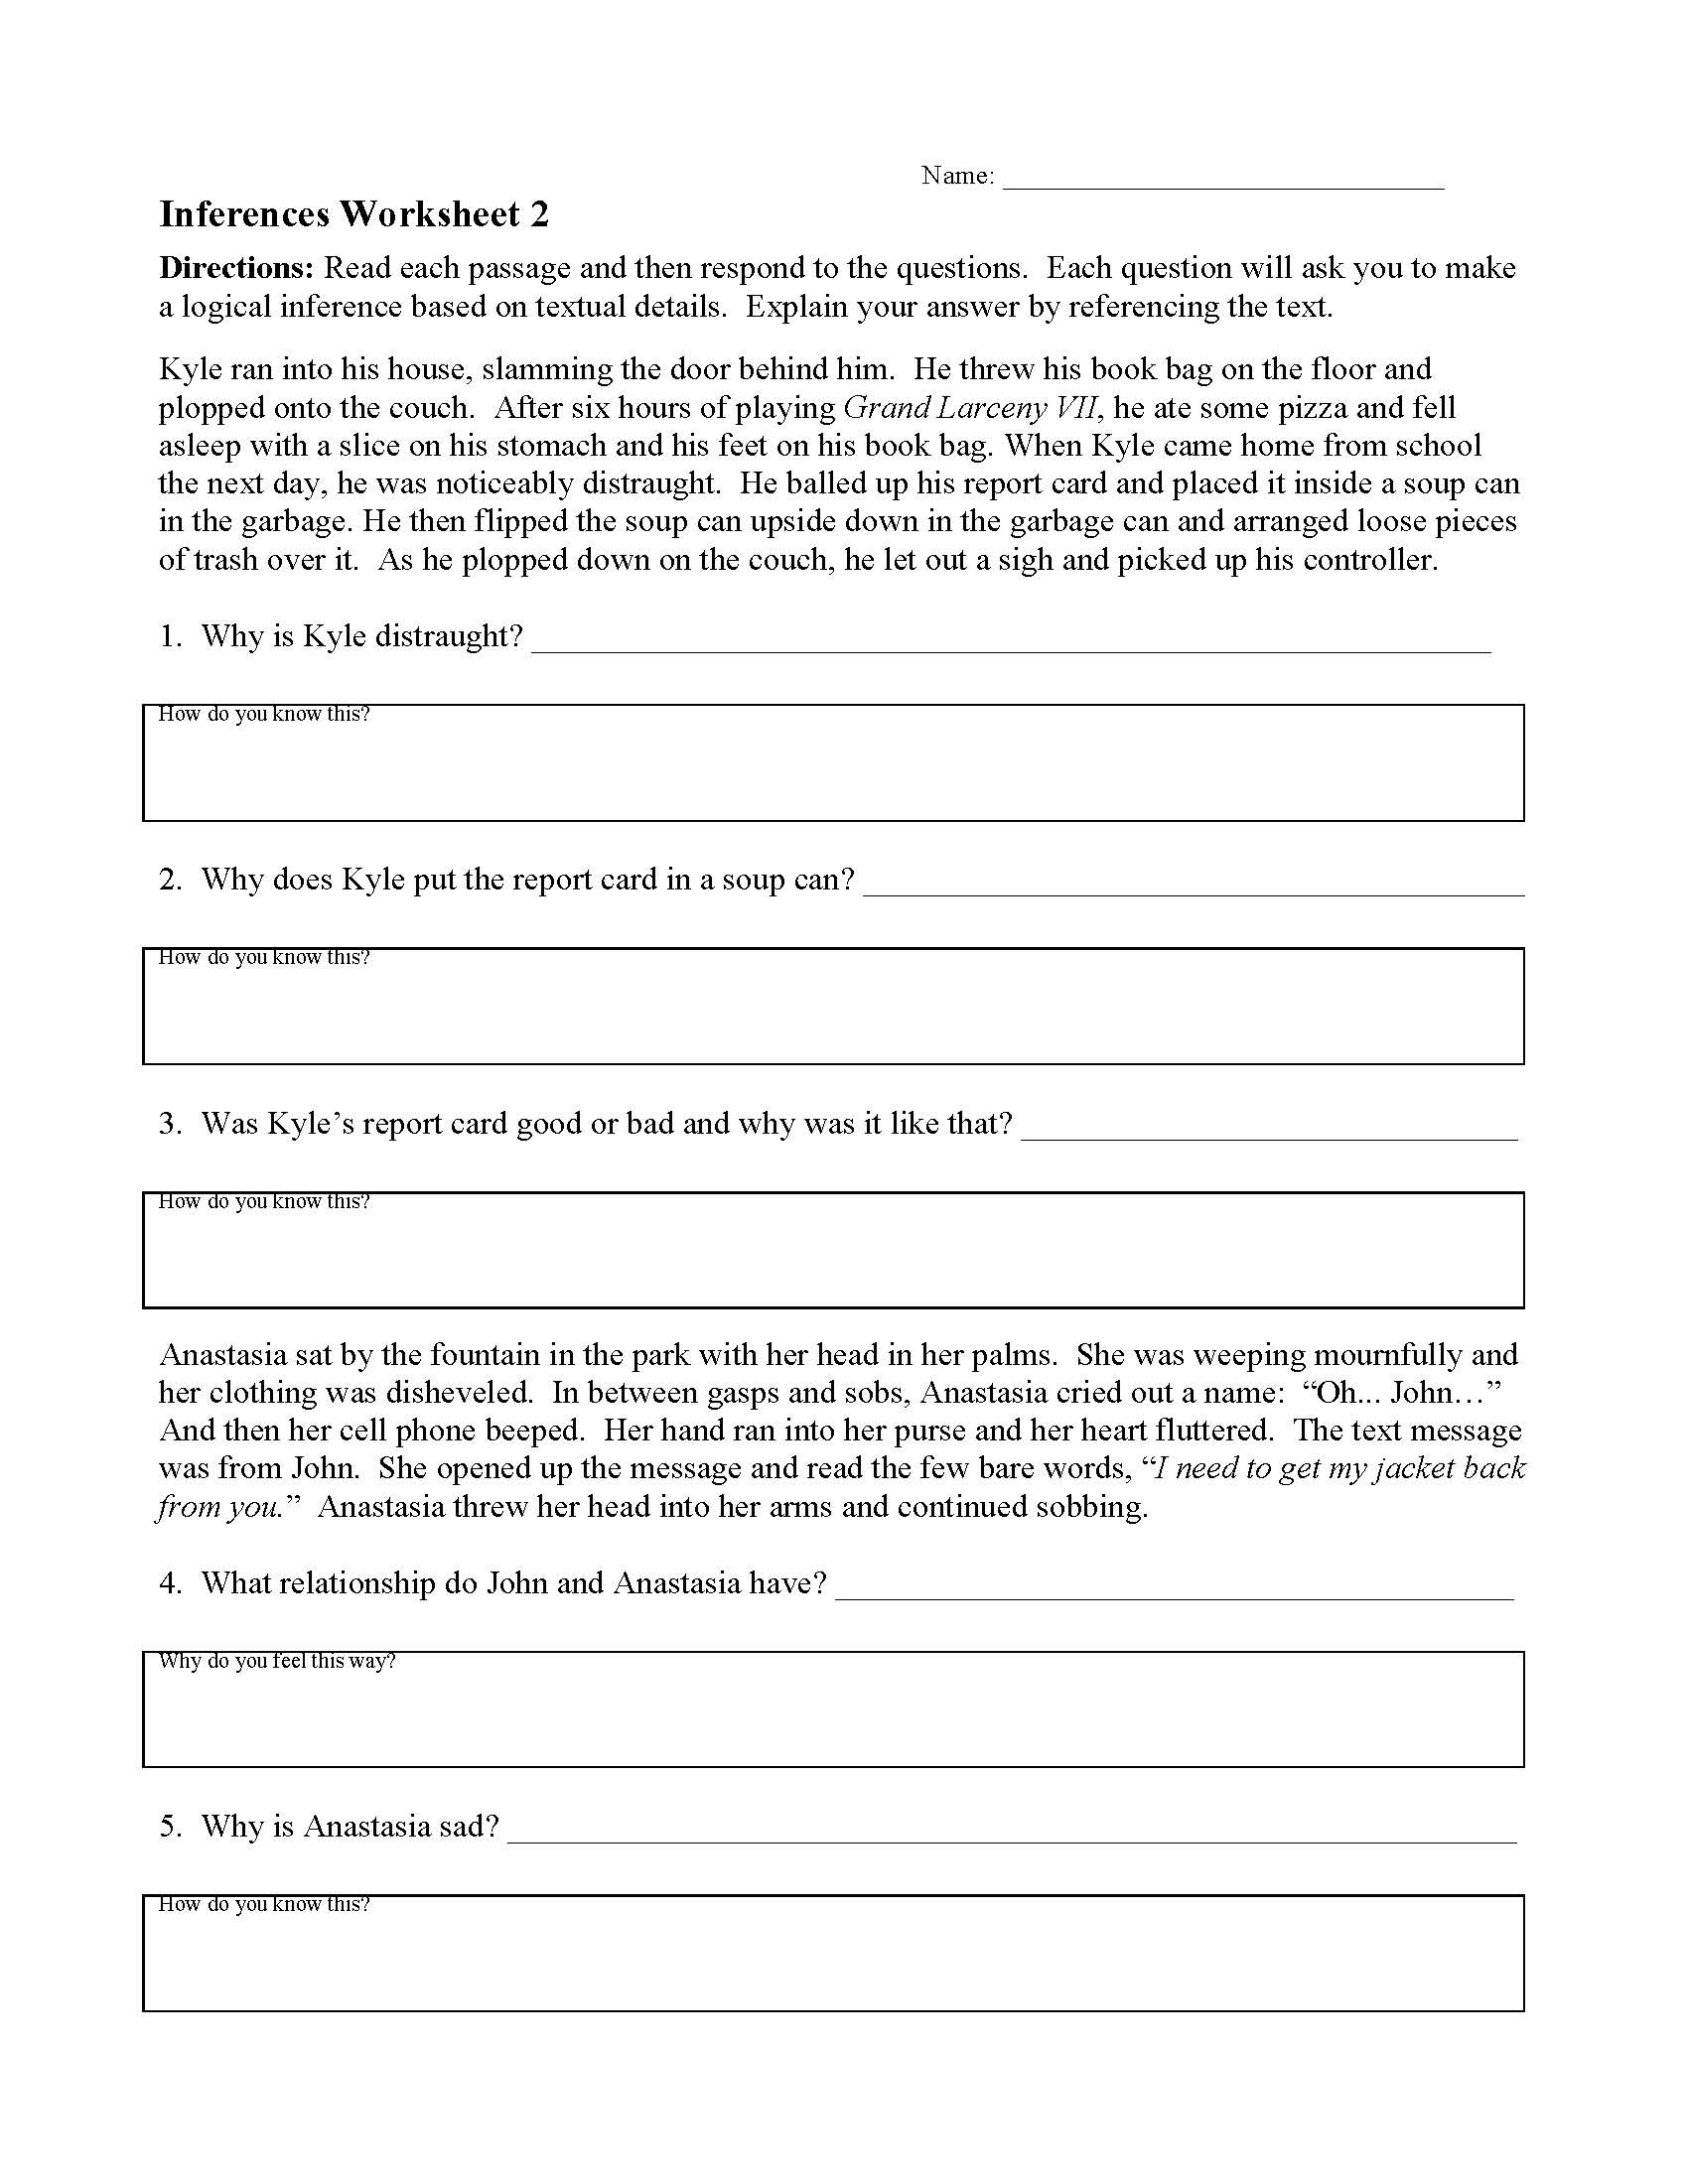 Inferences Worksheet 2 Answers —